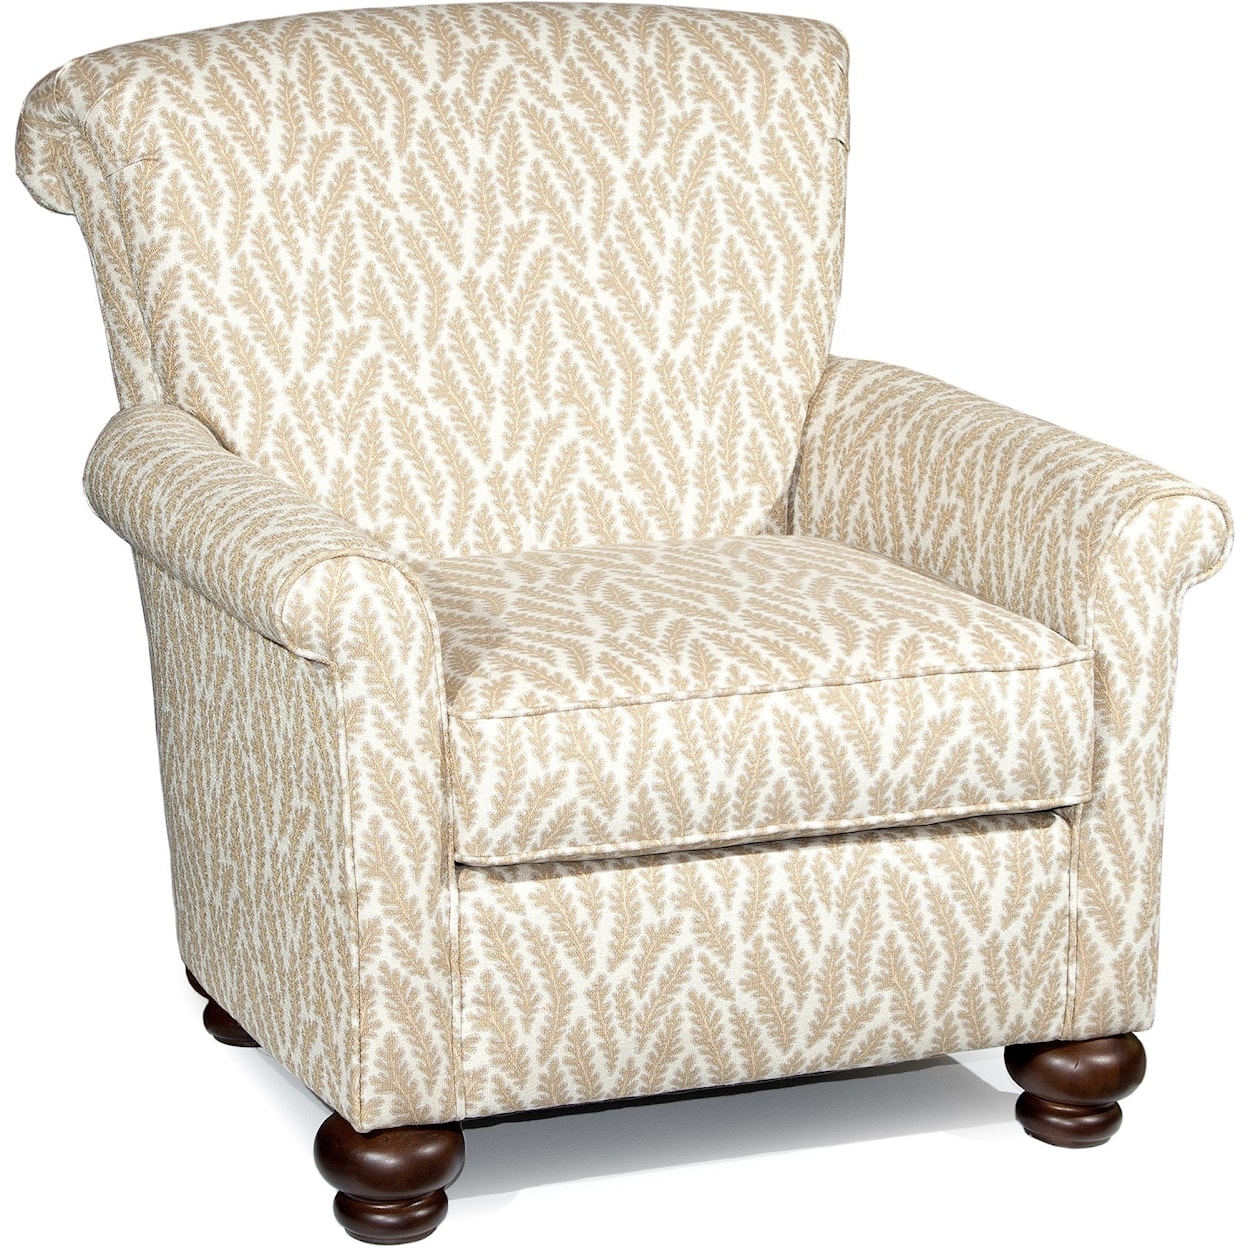 Chairs America Accent Chairs and Ottomans Traditional Chair